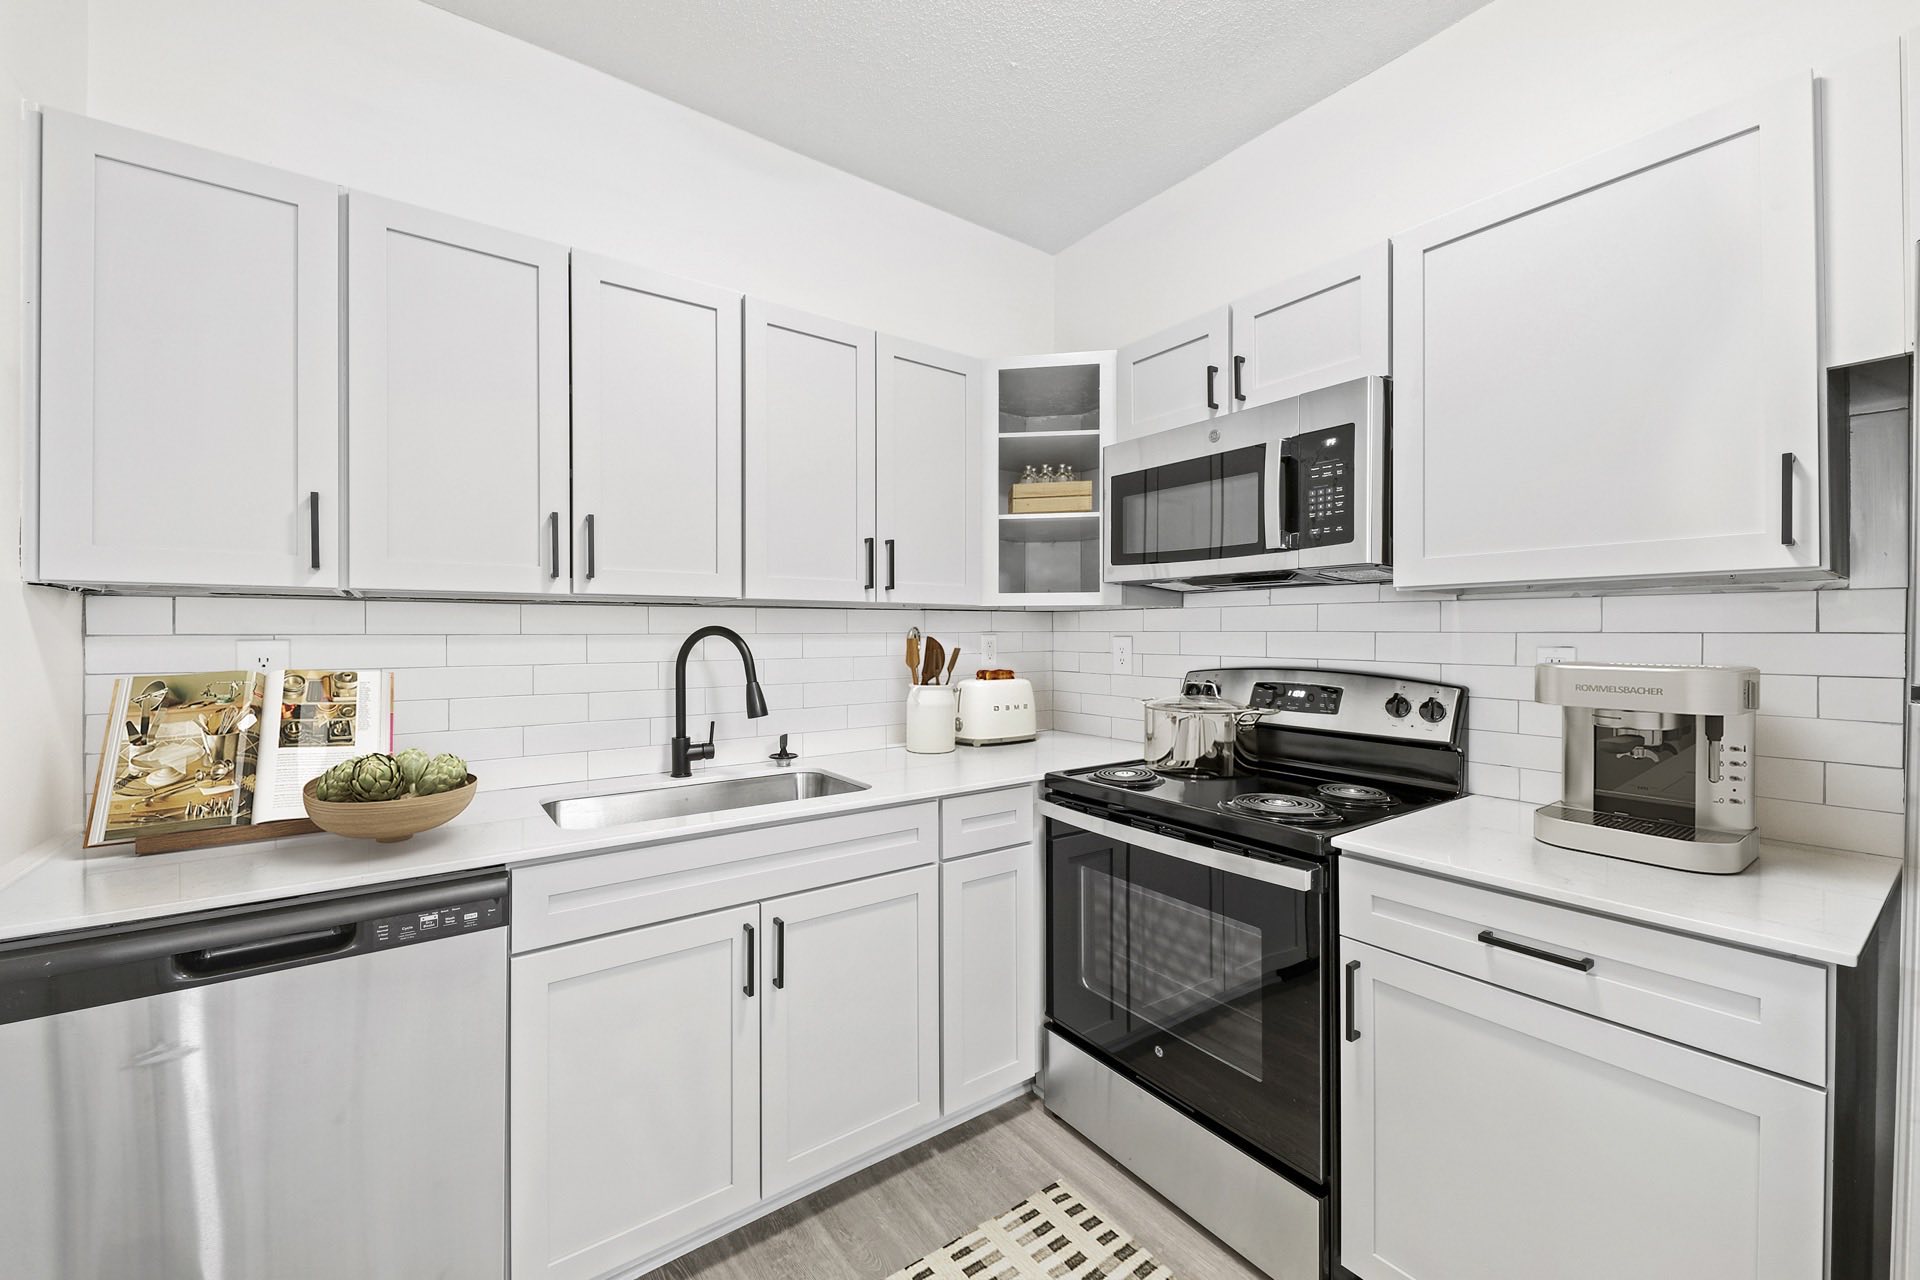 Kitchen with white shaker cabinets and stainless steel appliances